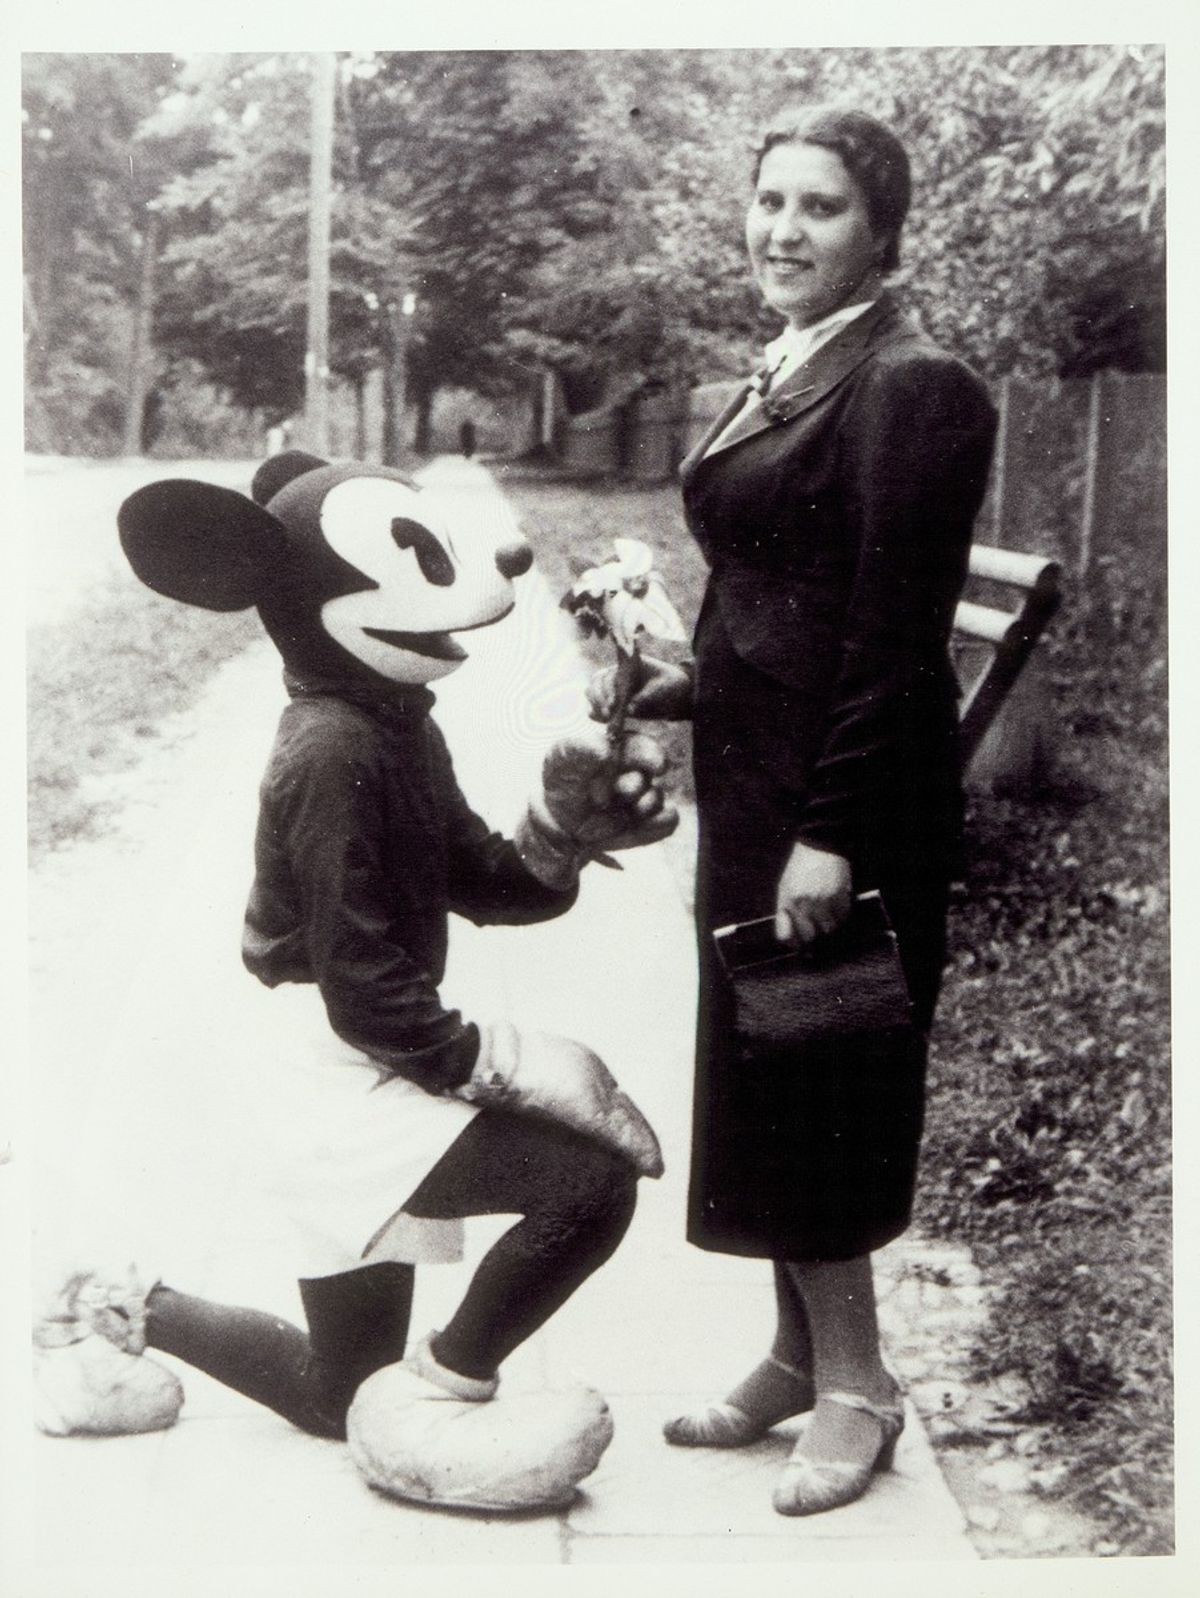 Esther Lapp poses with a person dressed as Mickey Mouse in Eisiskes. Courtesy of United States Holocaust Memorial Museum.